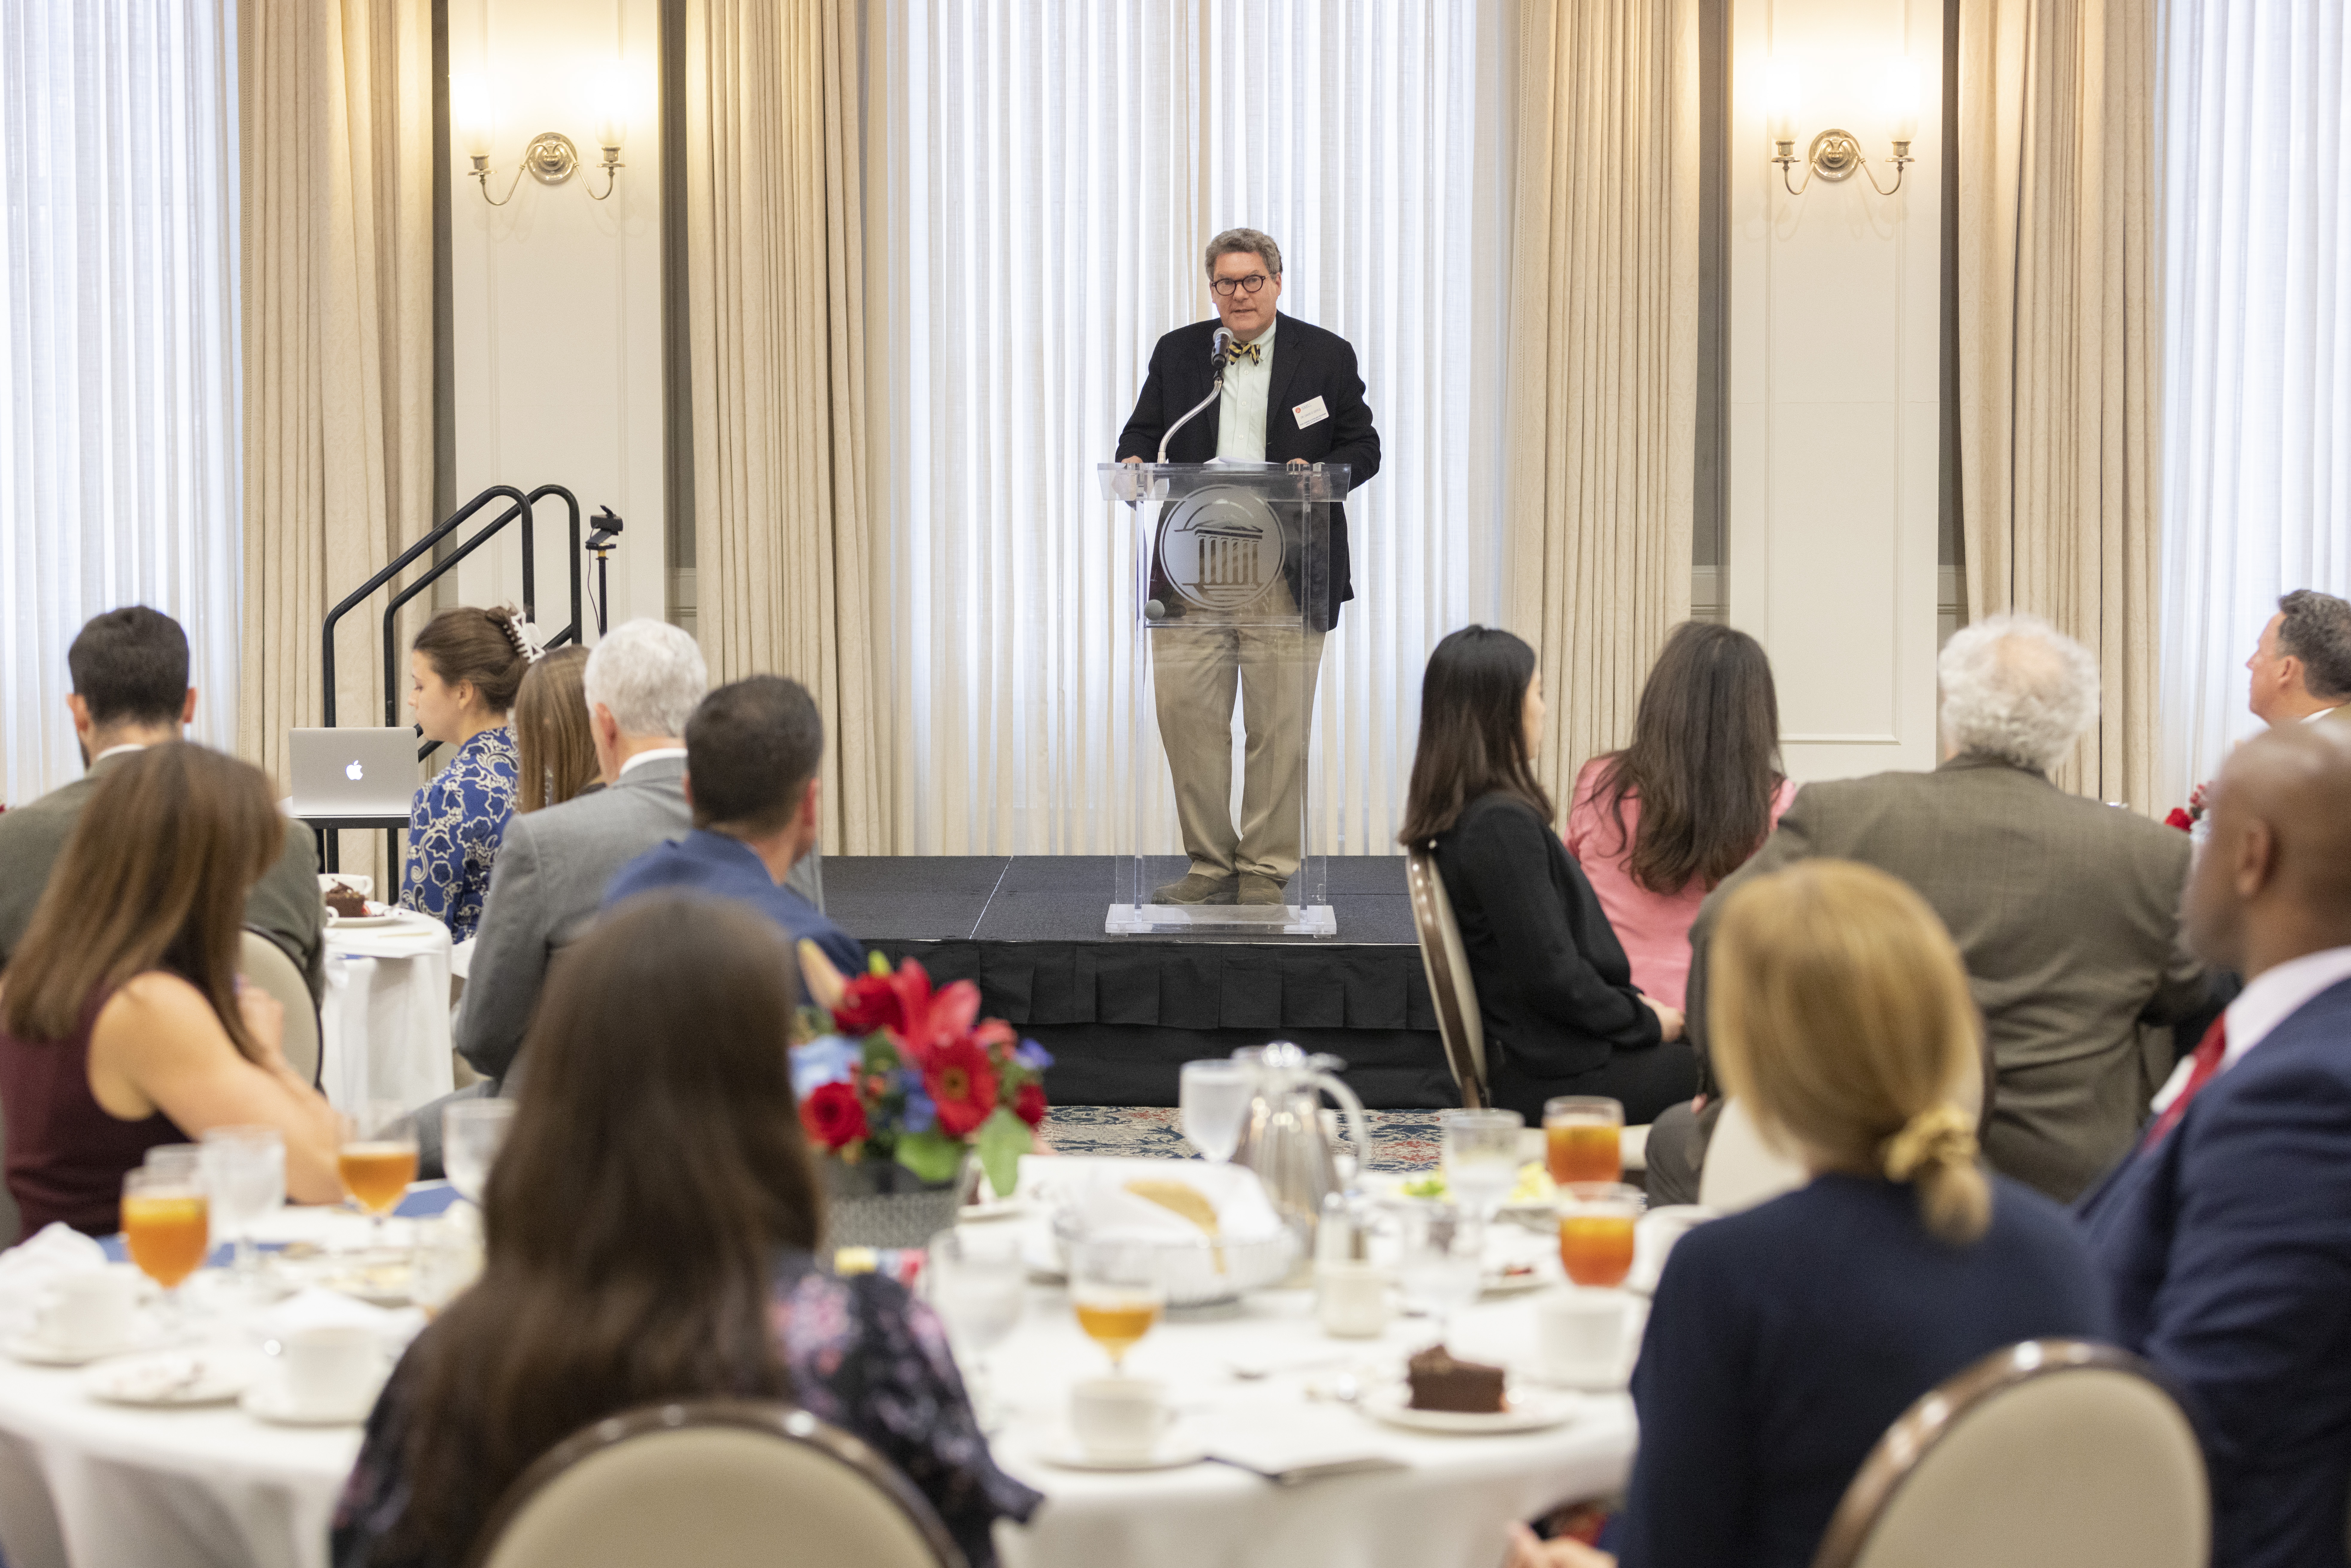 Dr. David D. Doyle delivers remarks at the 2022 annual Hyer Society Induction Ceremony